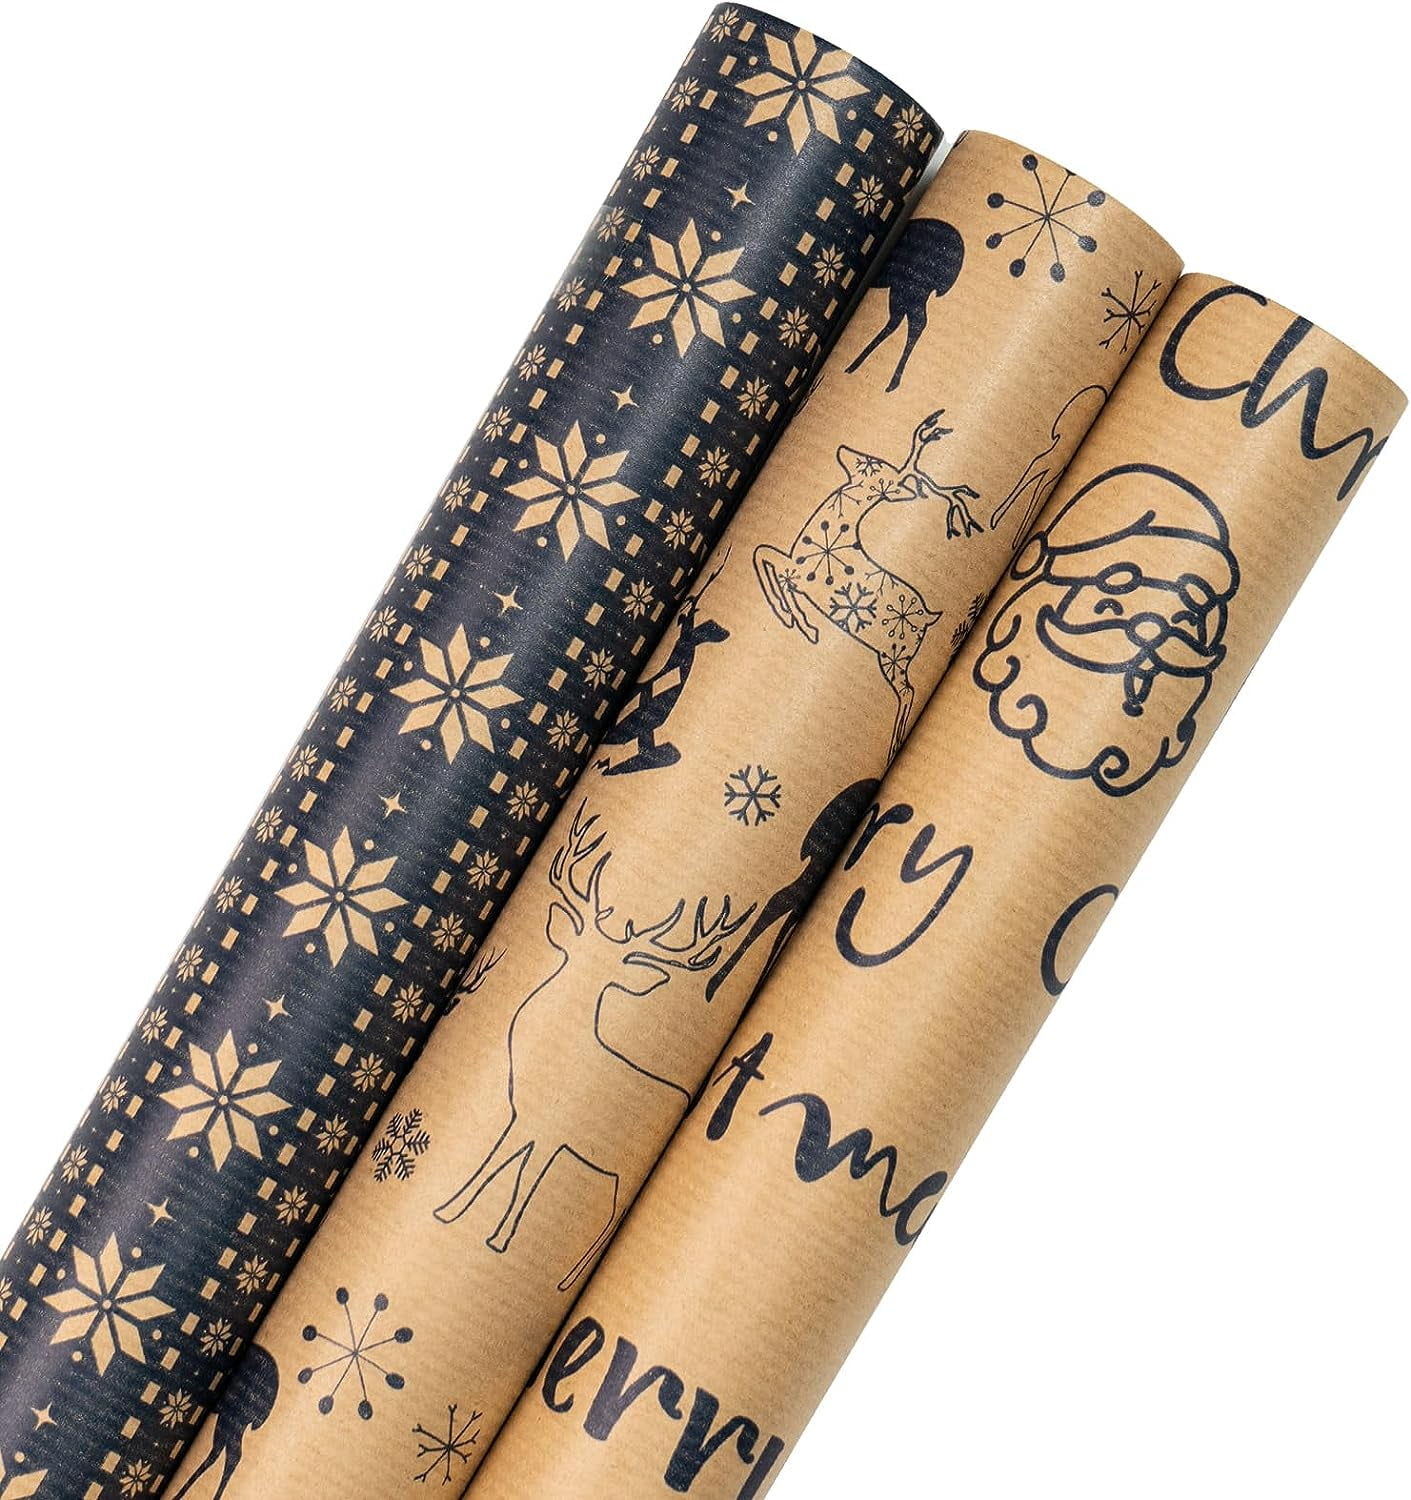 RUSPEPA Christmas Wrapping Paper Rolls - 17 inches x 10 feet per Roll,  Total of 3 Rolls - Reindeer and Snowflake 